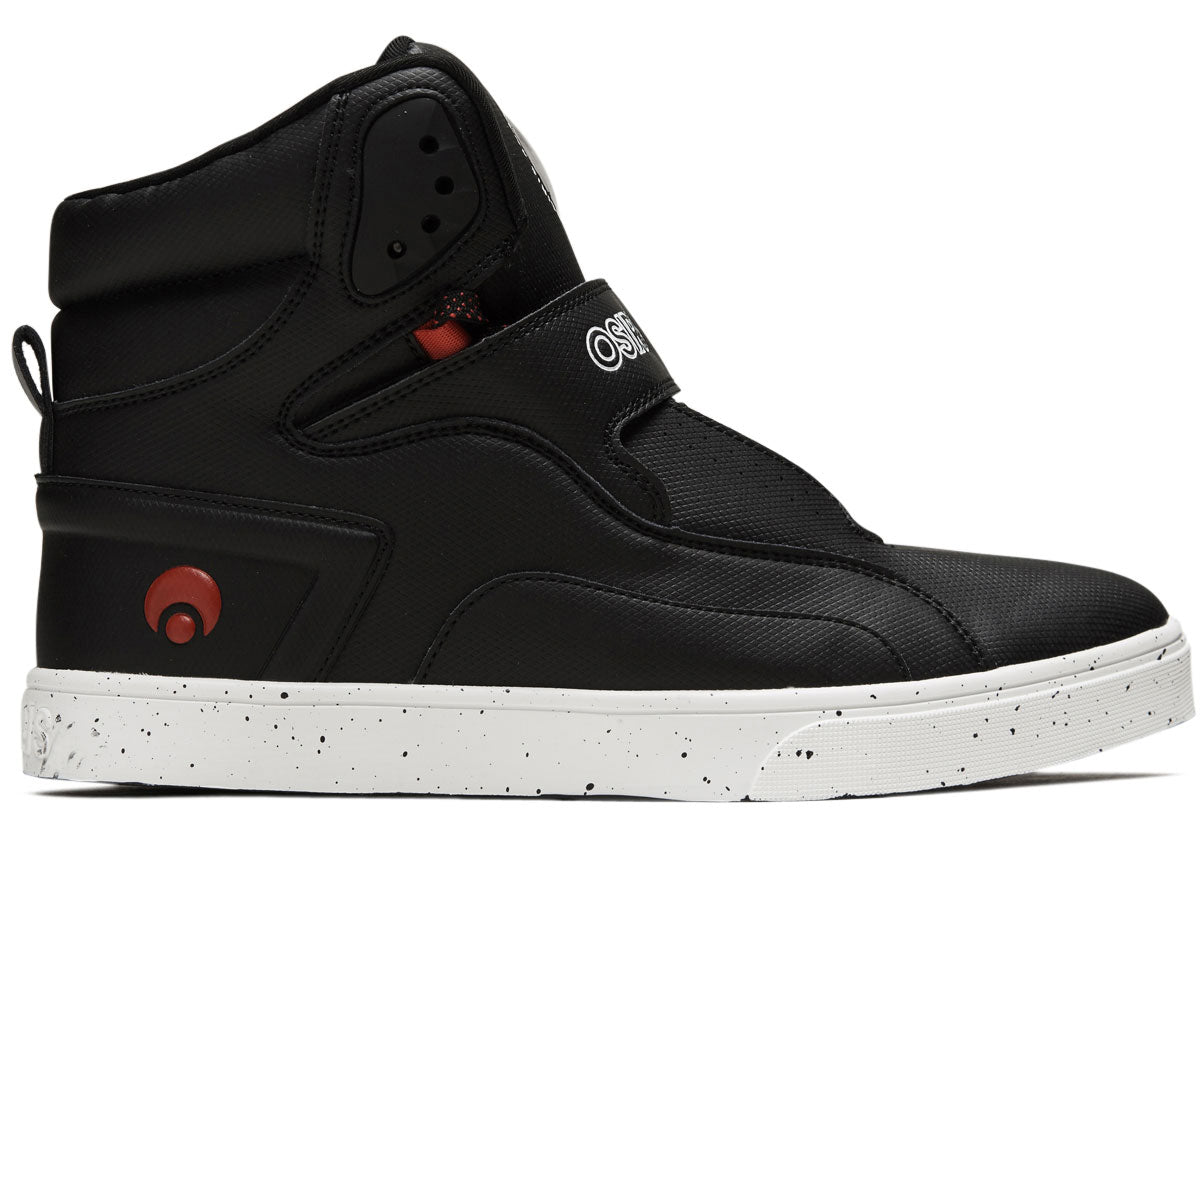 Osiris Rize Ultra Shoes - Black/Red/Spec image 1